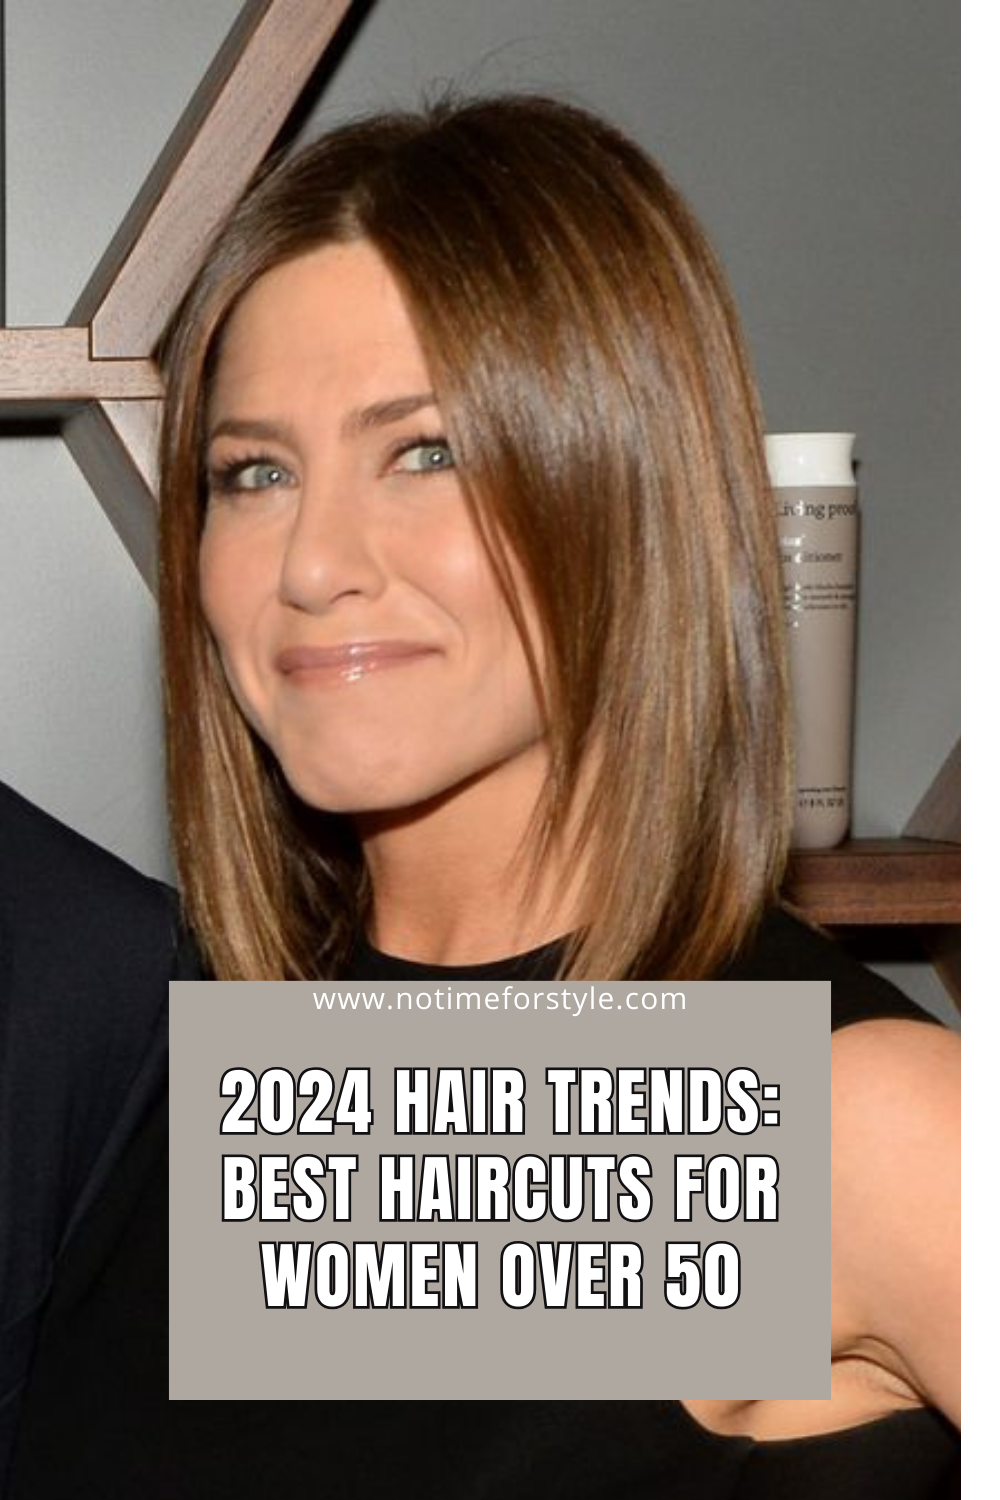 2024 Hair Trends - Best Haircuts for Women Over 50 — No Time For Style